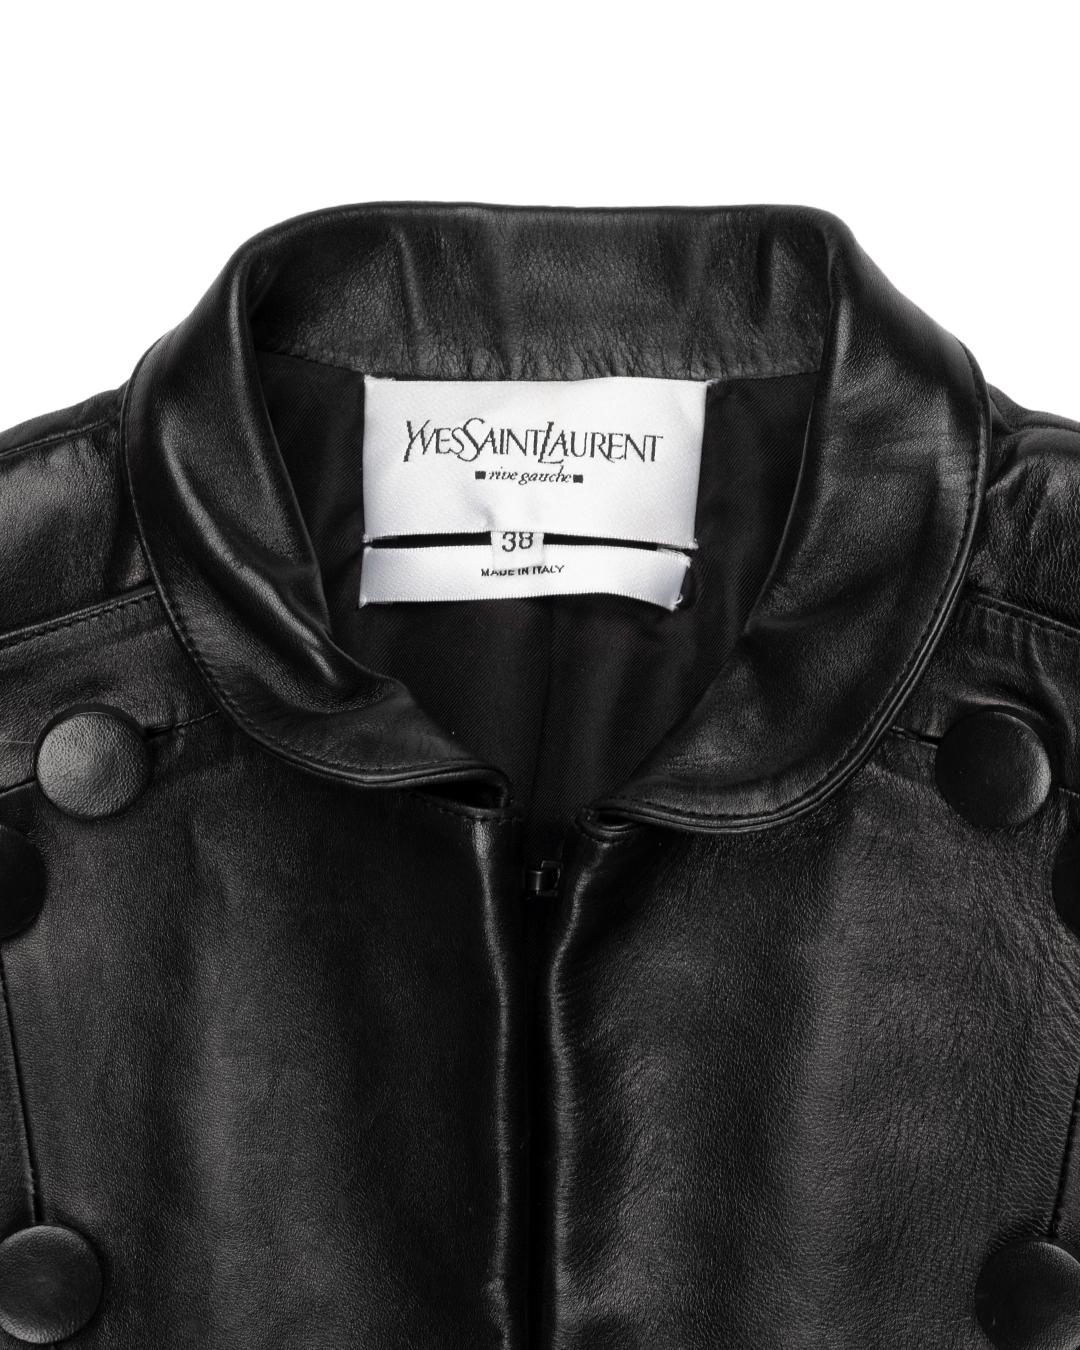 Yves Saint Laurent AW2001 Leather Officer Jacket In Excellent Condition For Sale In Beverly Hills, CA